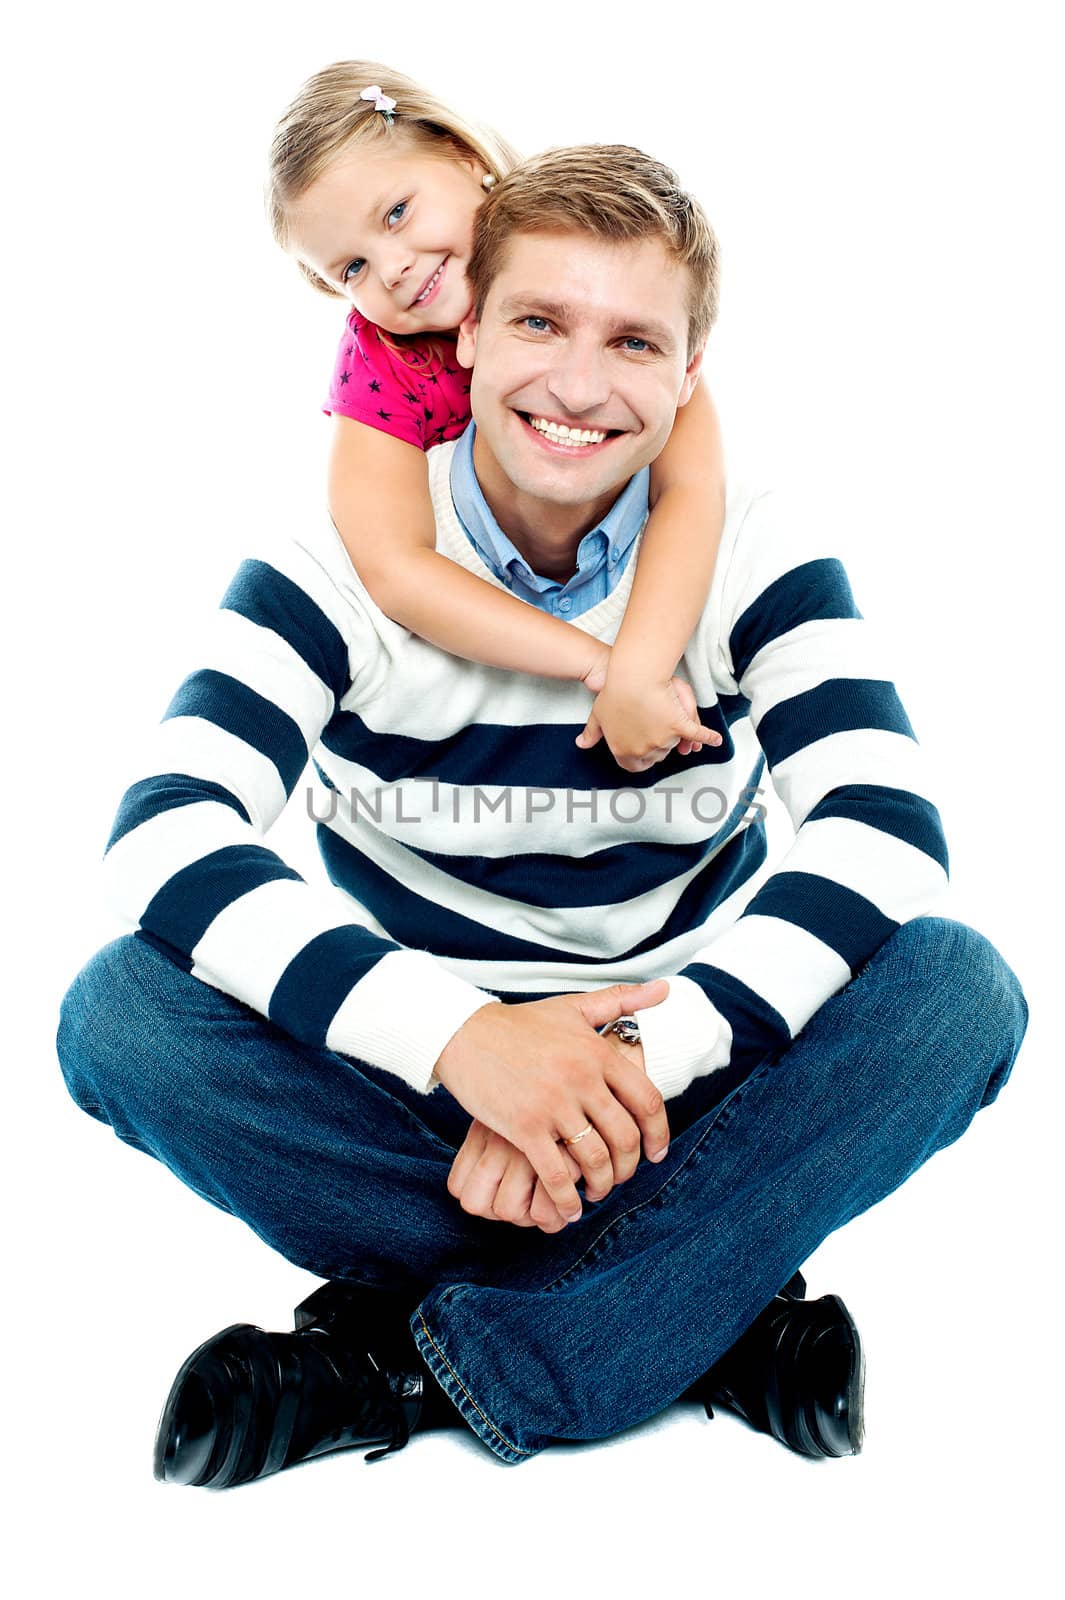 Father in winter wear sitting on the floor with his legs crossed and his daughter holding him from behind